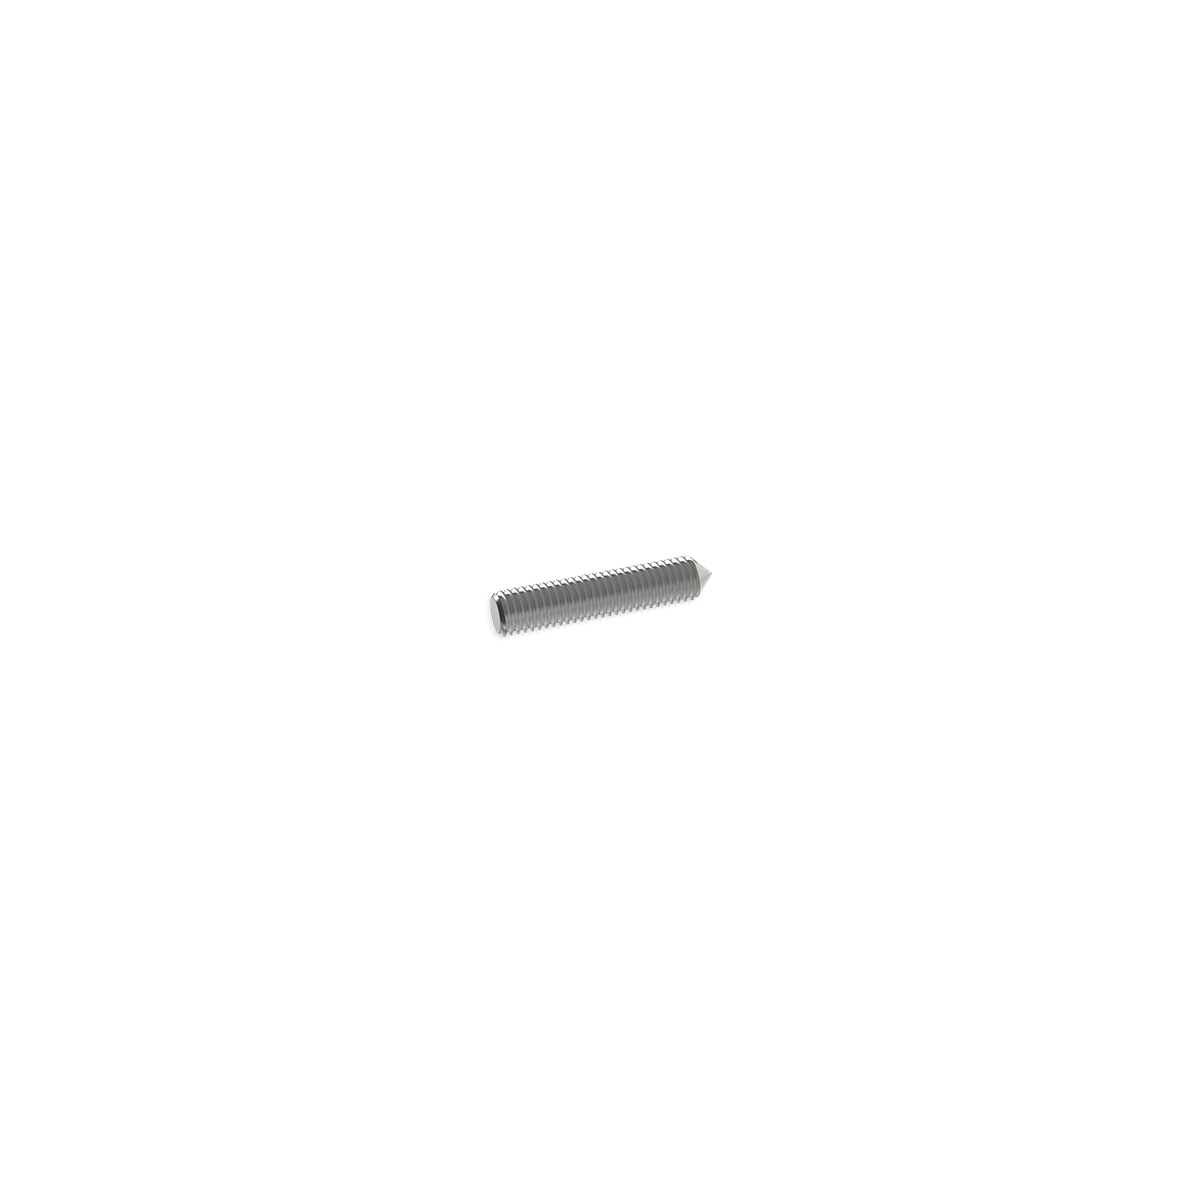 1/8'' Diameter X 5/8'' Long, Stainless Steel 6-32 Threaded Stud (1 End Flat - 1 End Conical)